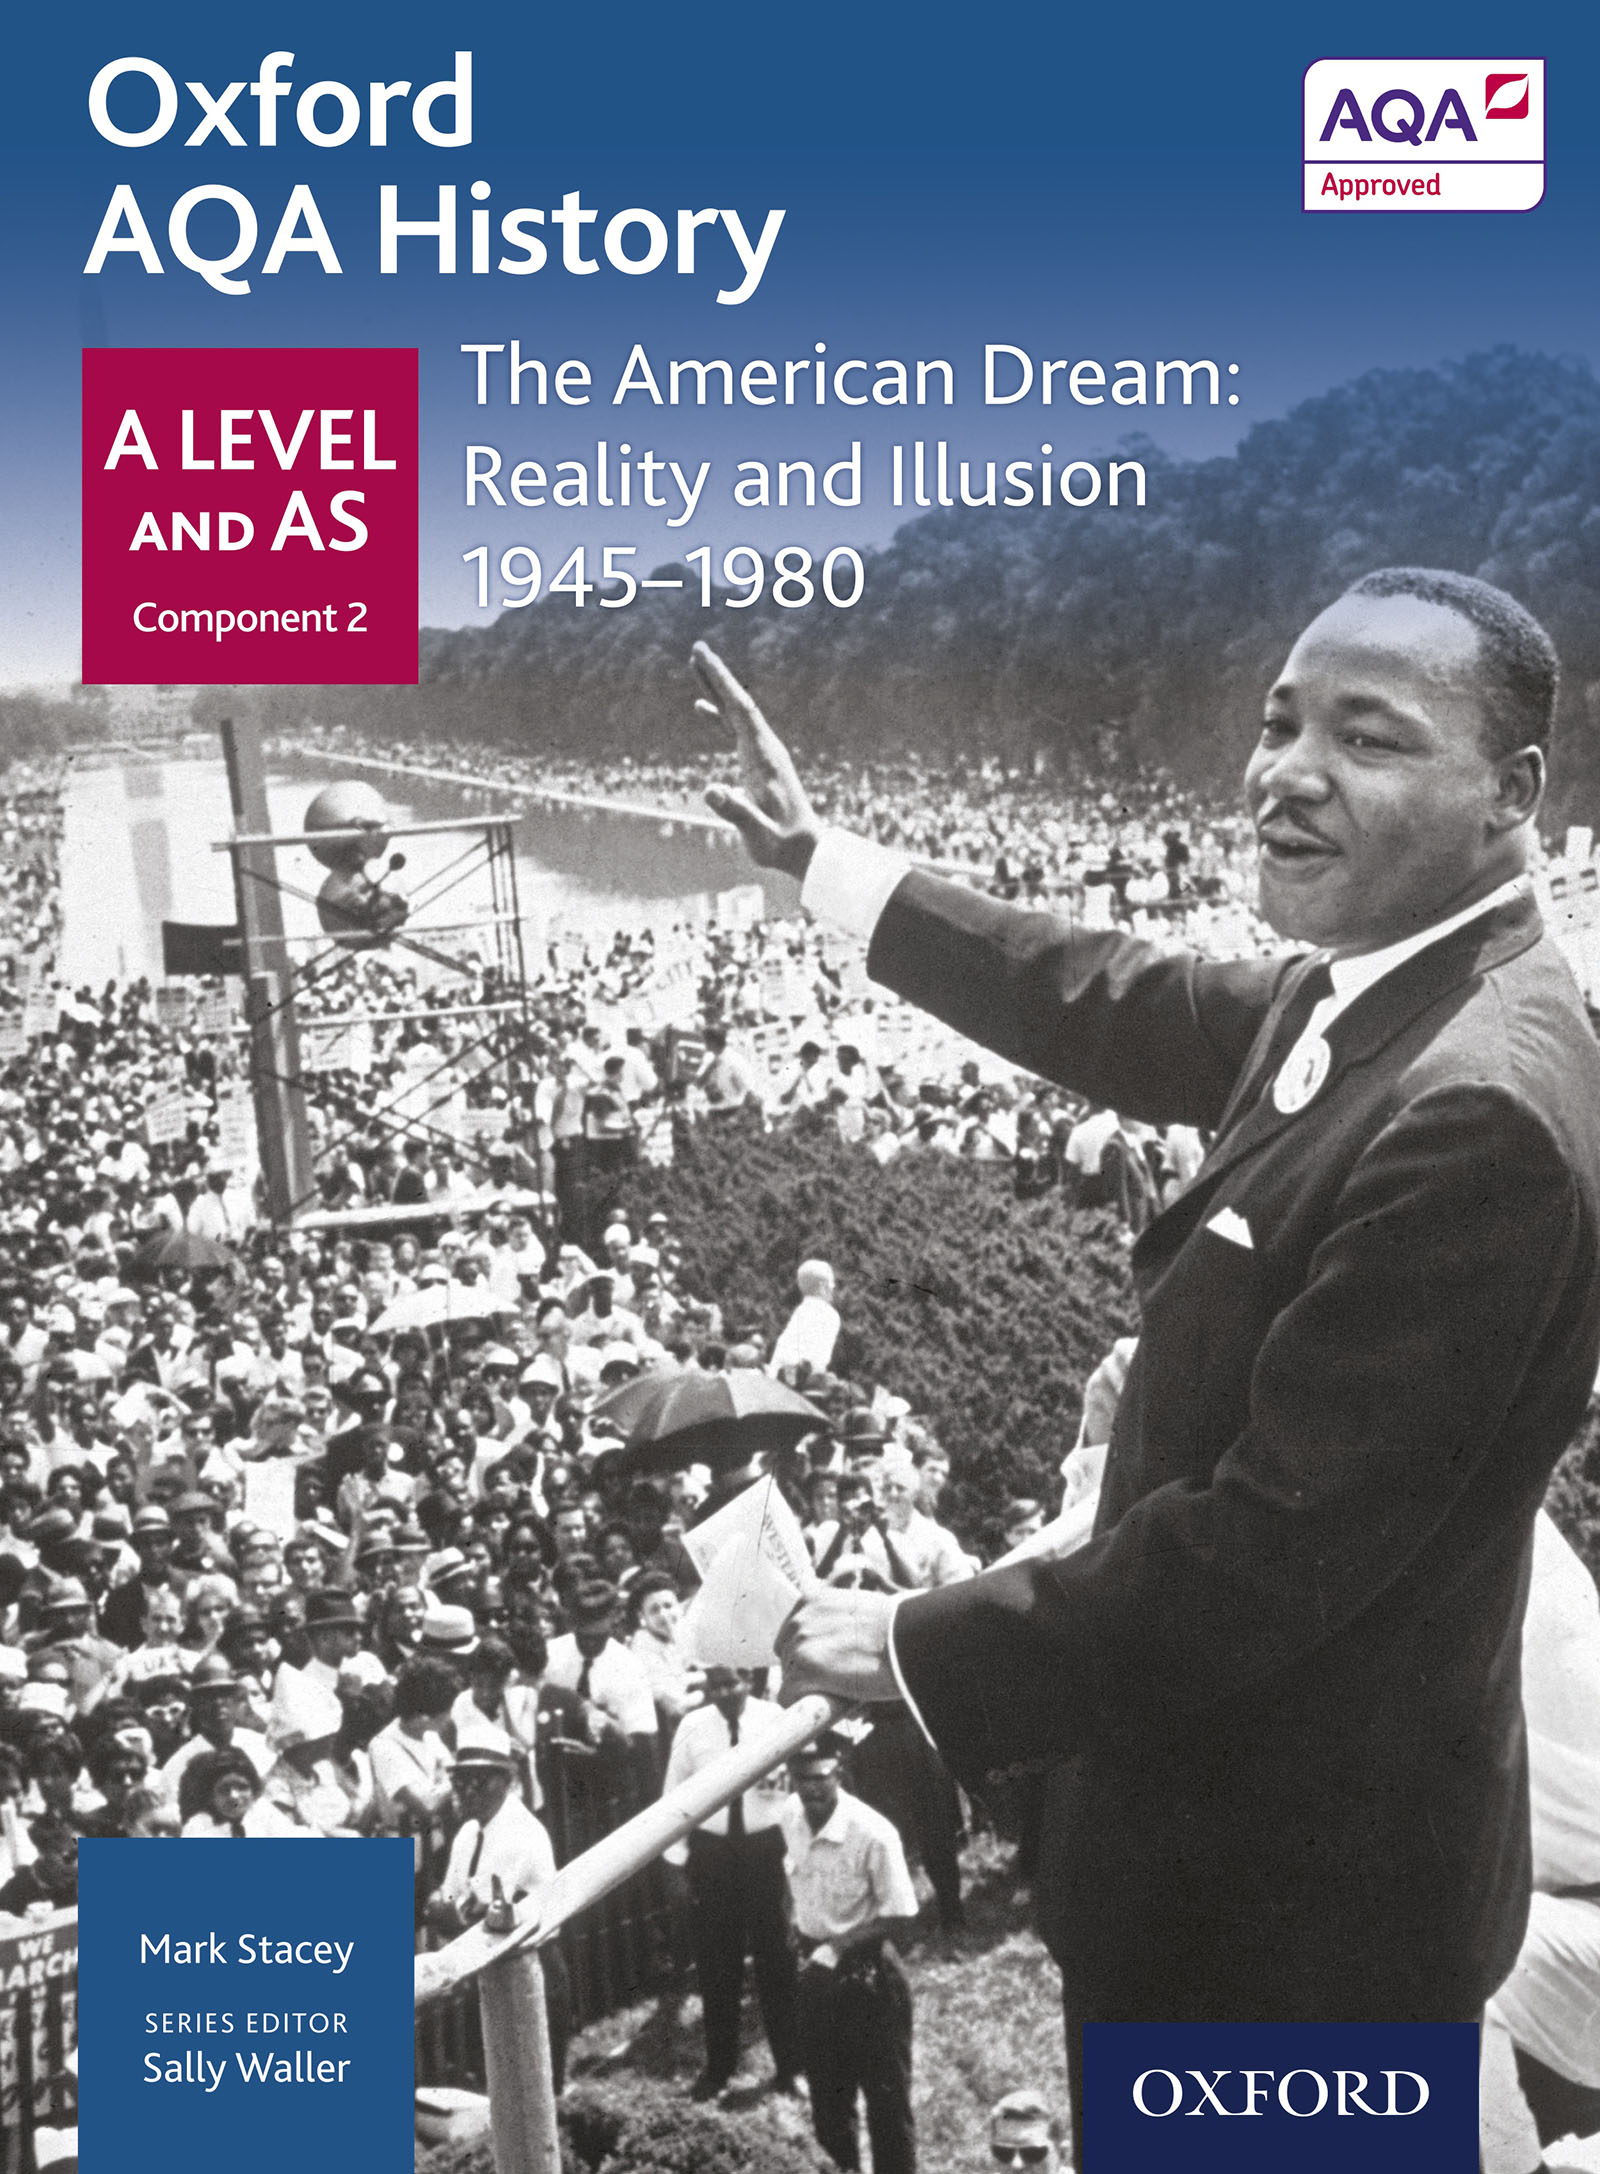 Oxford AQA History: A Level and AS Component 2: The American Dream: Reality and Illusion 1945-1979